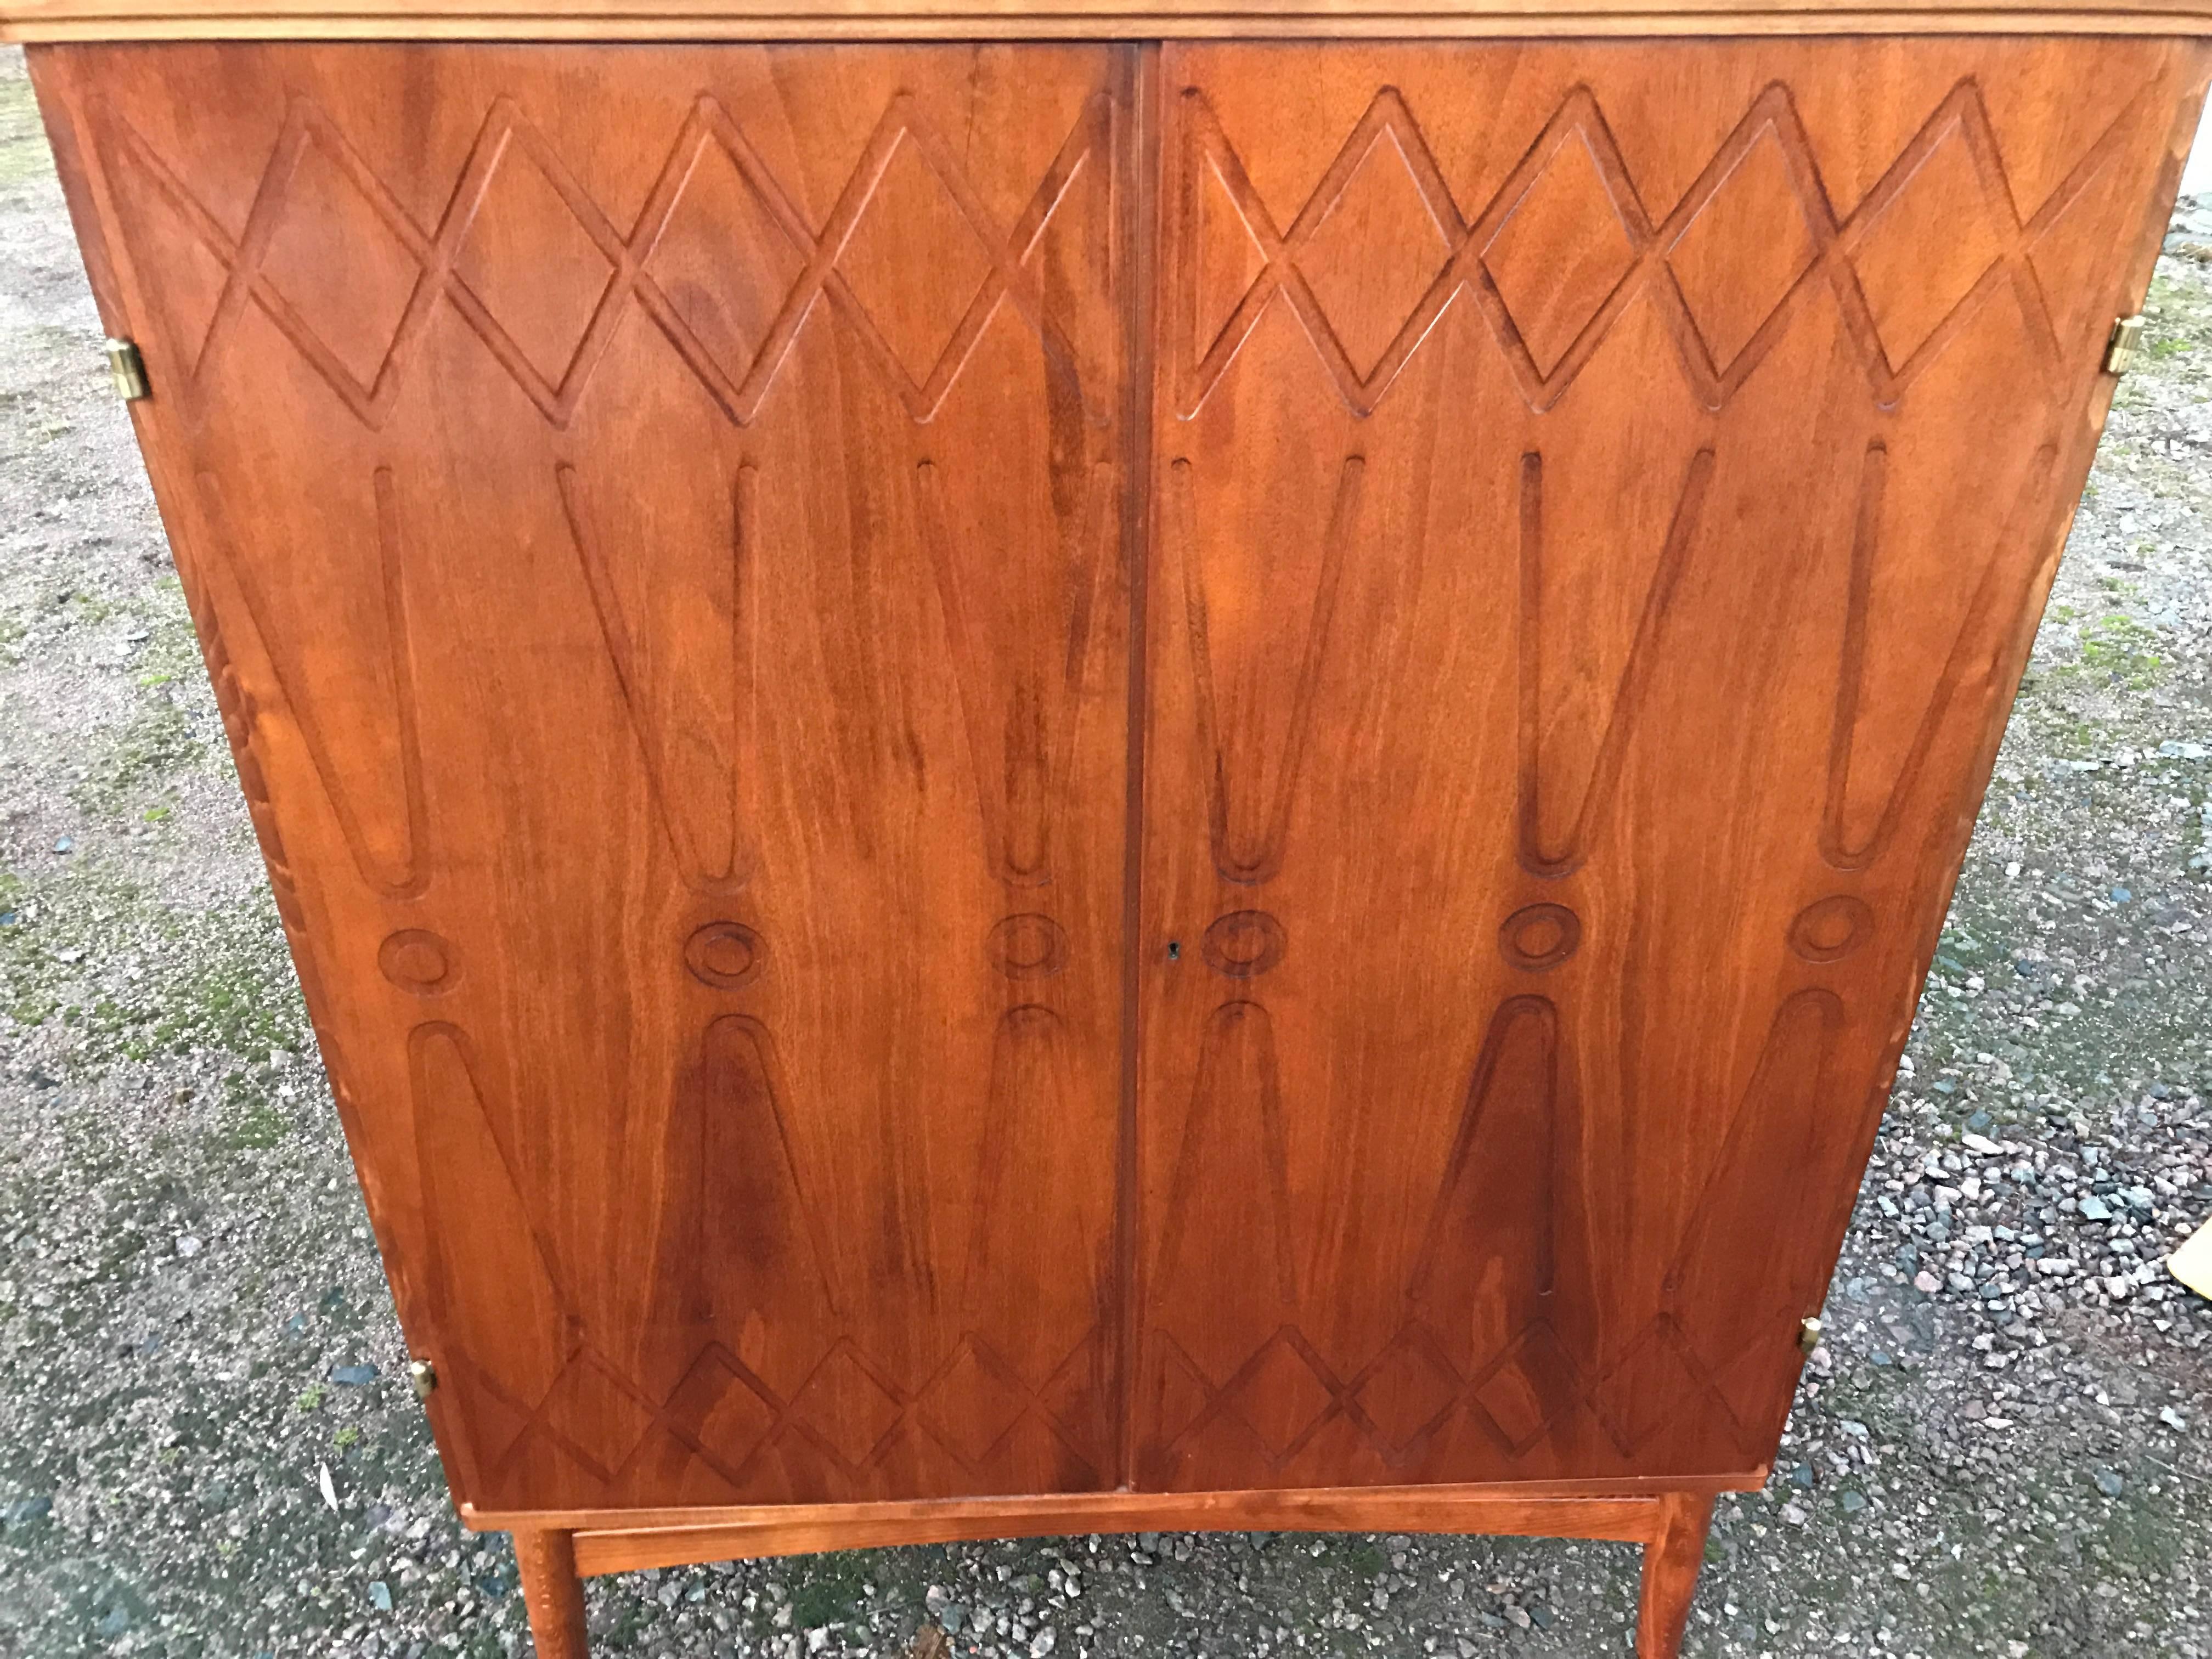 Nice Midcentury cabinet in teak/mahogany by Yngve Ekström for Westbergs Möbler (Sweden). Two beautiful doors with milled relief decor, interior with pullout trays and shelves. Legs in beech, unusual model.

Yngve Ekström had his personal style,